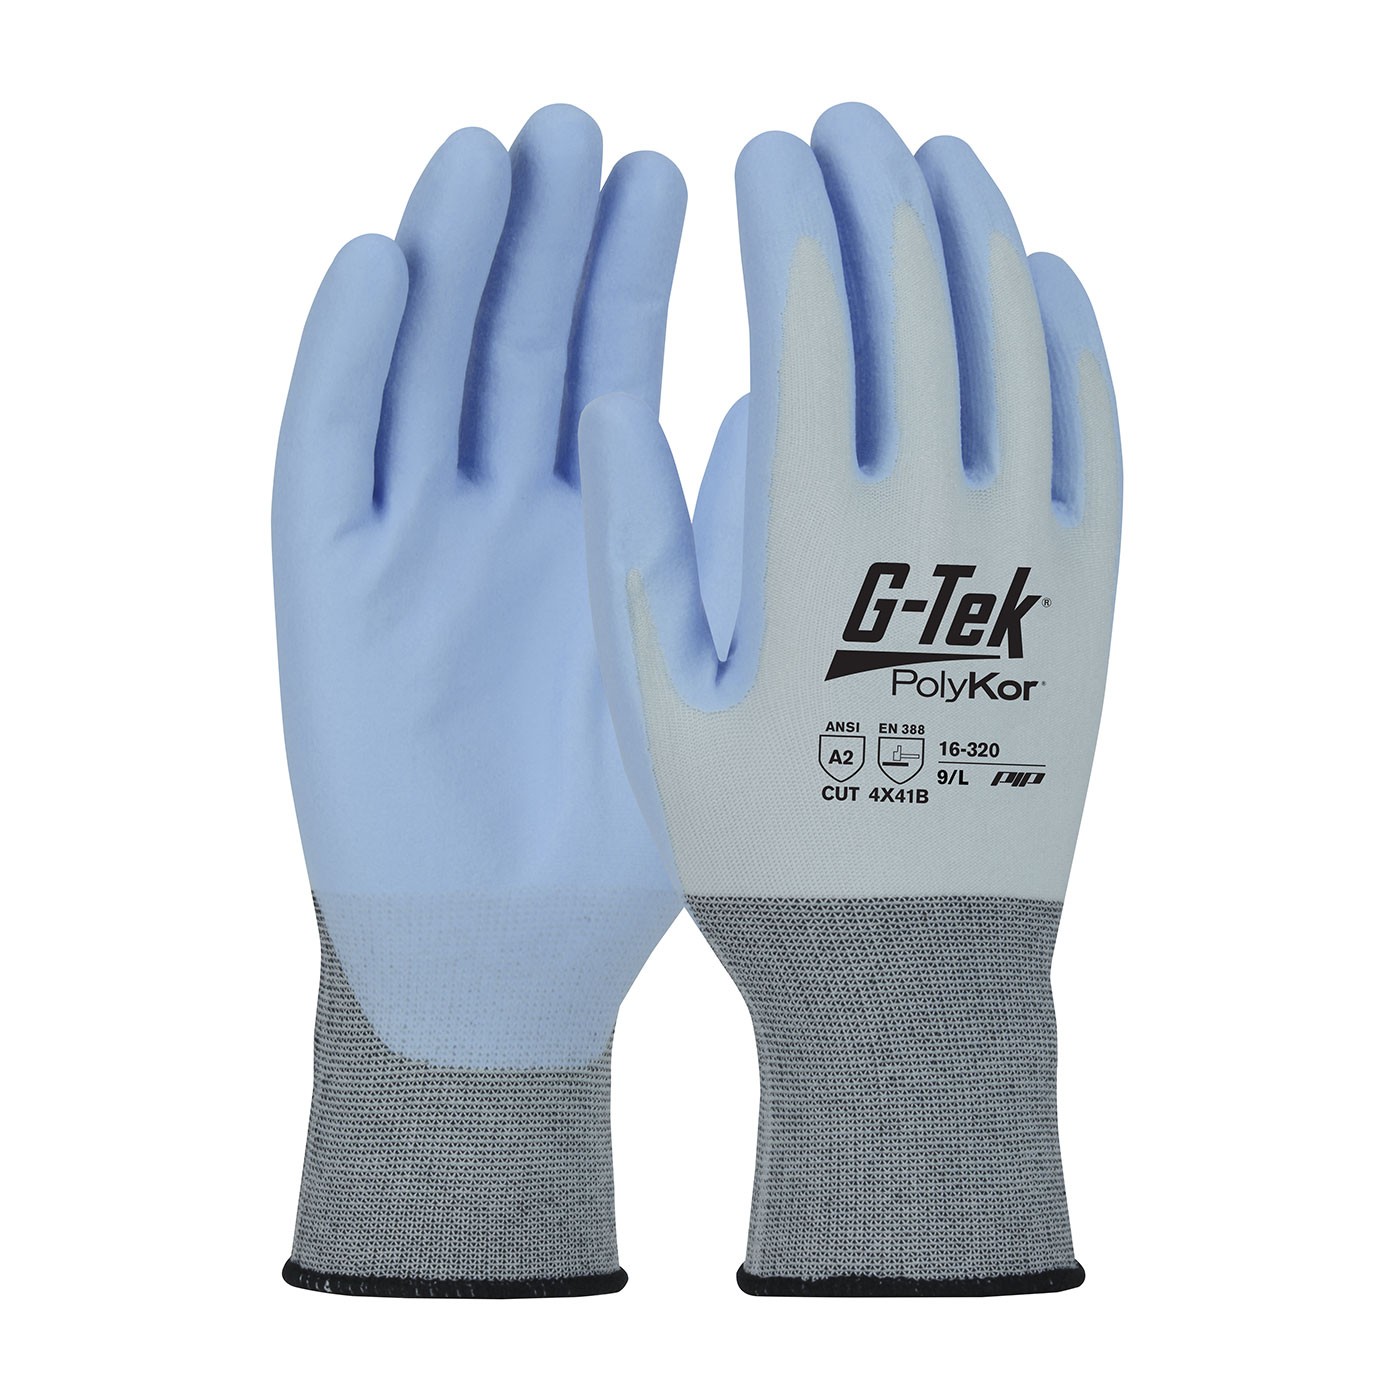  G-Tek® PolyKor® X7™ Seamless Knit PolyKor™ X7™ Blended Glove with NeoFoam® Coated Palm & Fingers - Touchscreen Compatible  (#16-320)